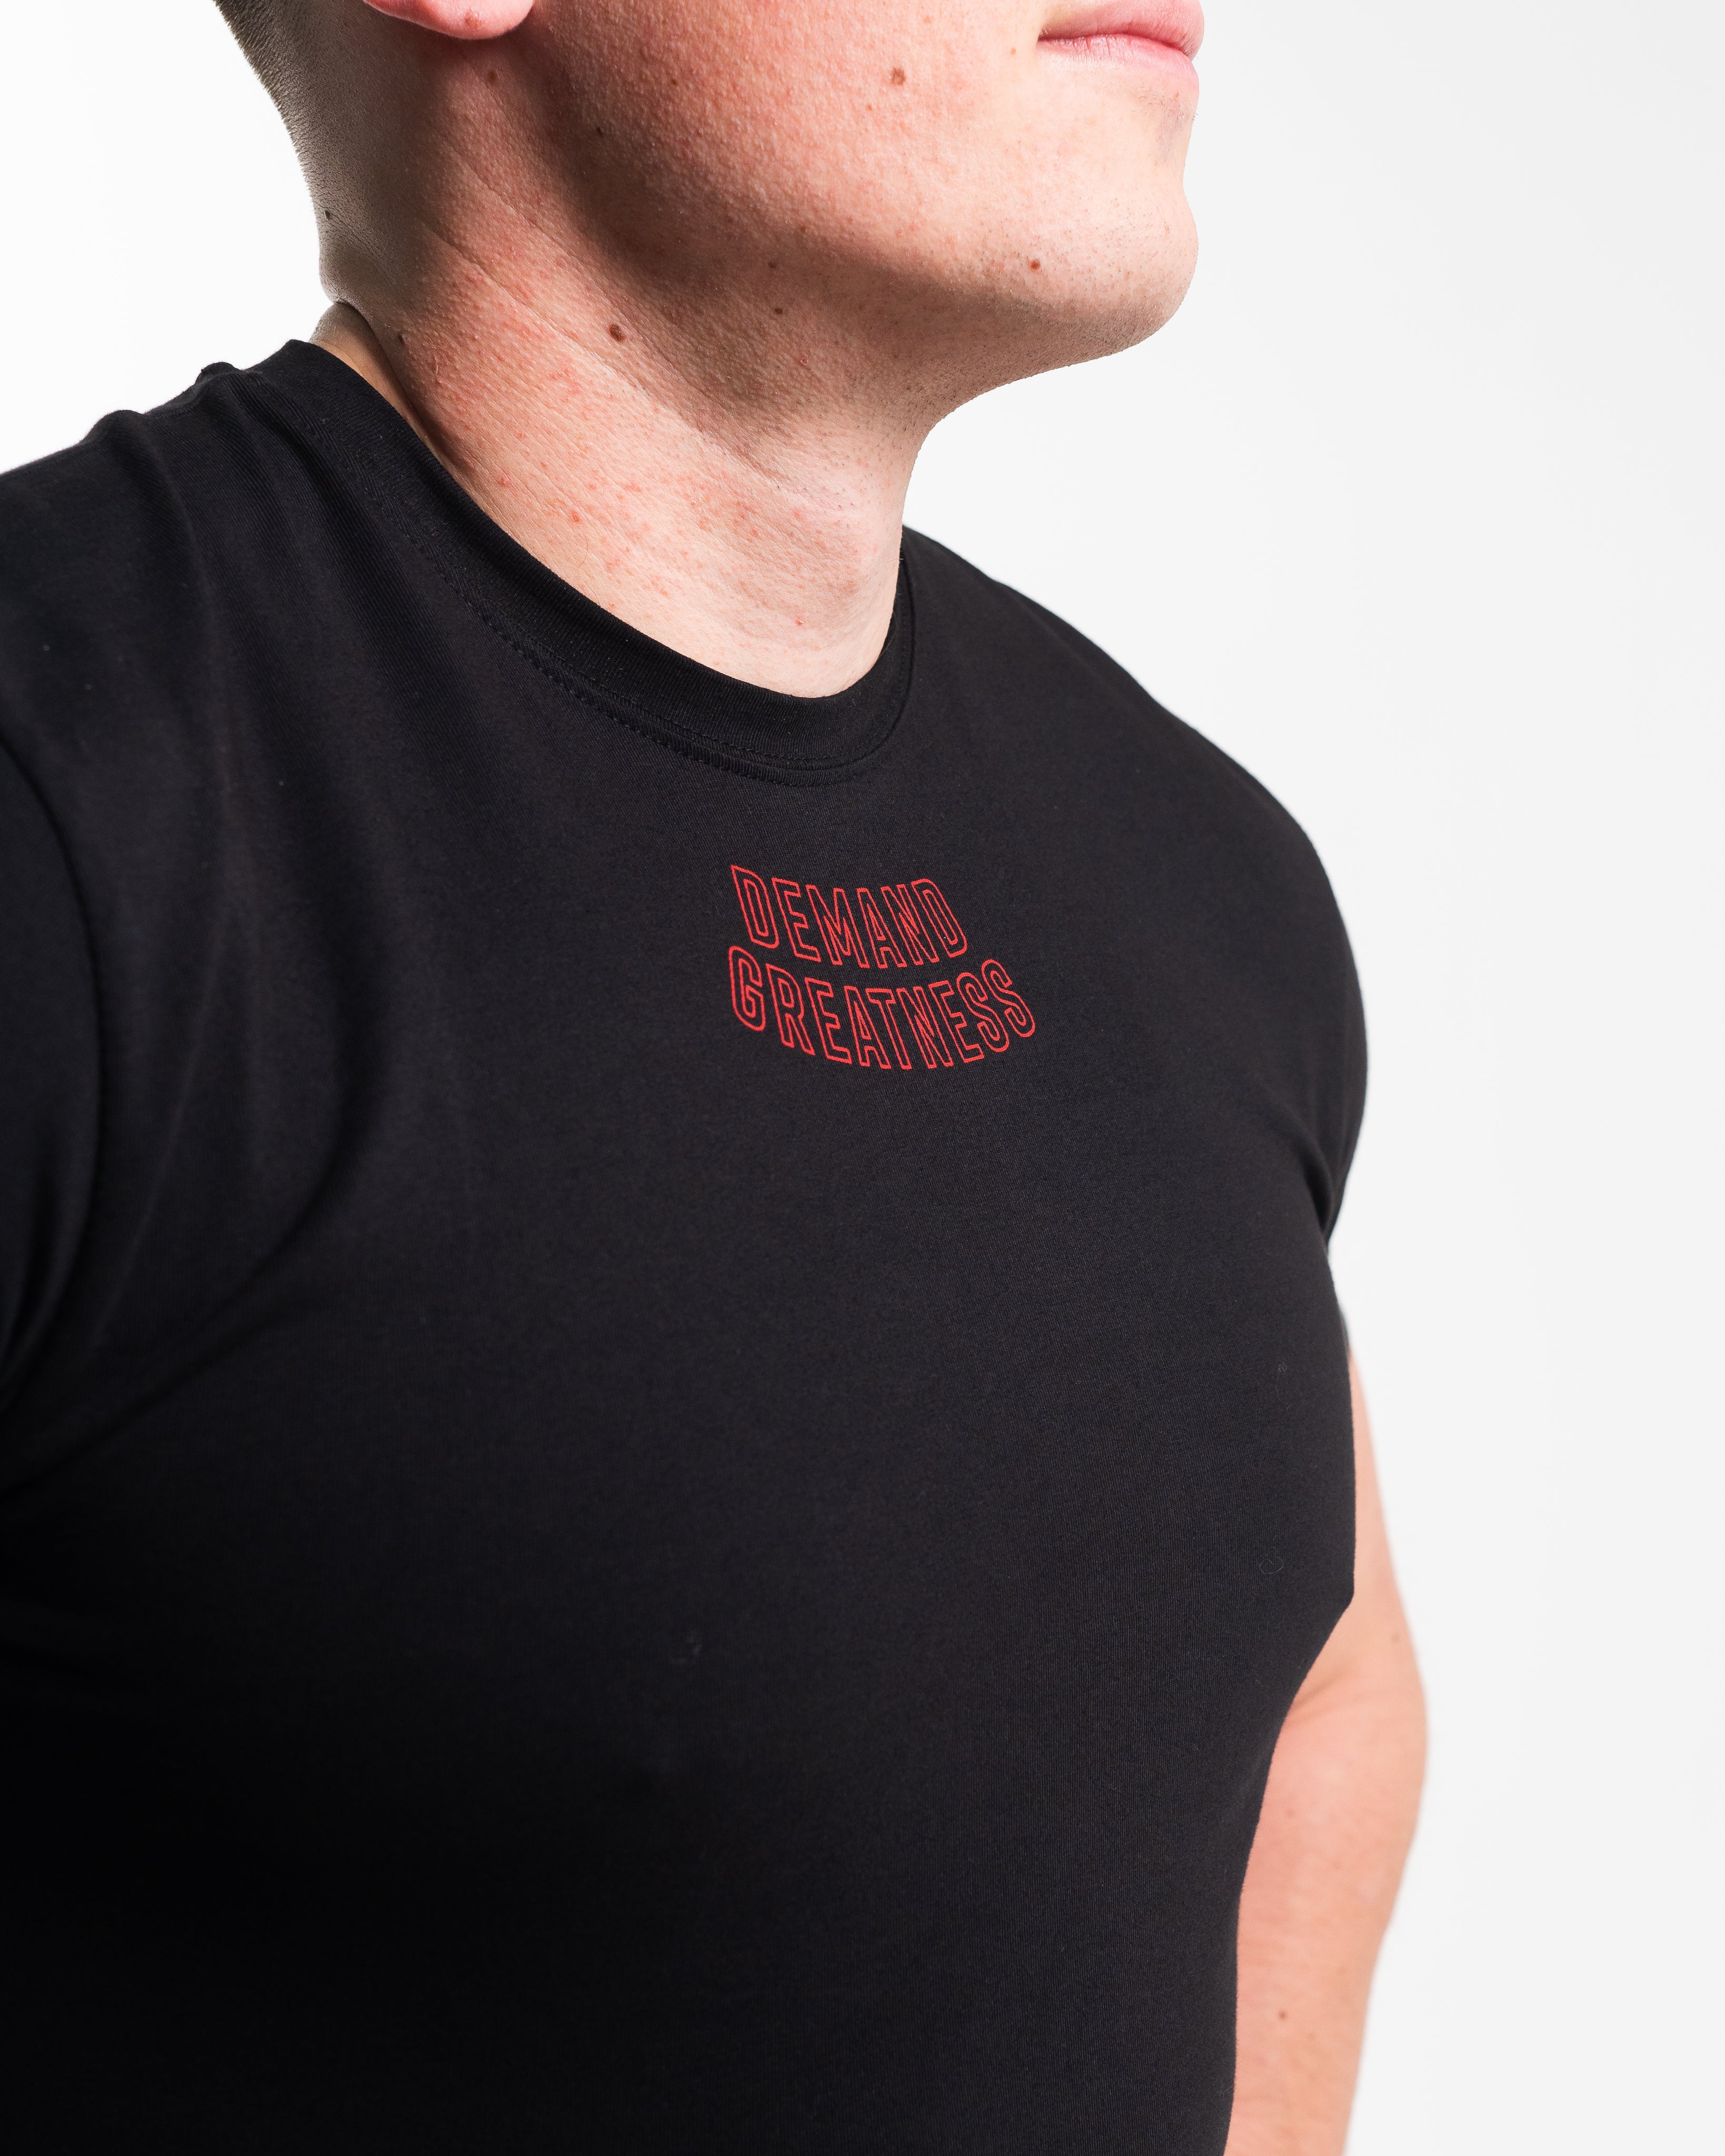 DG23 Red Dawn is our newmeet shirt design highlighting Demand Greatness with a double outline font to showcase your impact on the platform. The DG23 Meet Shirt is IPF Approved. Shop the full A7 Powerlifting IPF Approved Equipment collection. The IPF Approved Kit includes Powerlifting Singlet, A7 Meet Shirt, A7 Zebra Wrist Wraps, A7 Deadlift Socks, Hourglass Knee Sleeves (Stiff Knee Sleeves and Rigor Mortis Knee Sleeves). All A7 Powerlifting Equipment shipping to UK, Norway, Switzerland and Iceland.